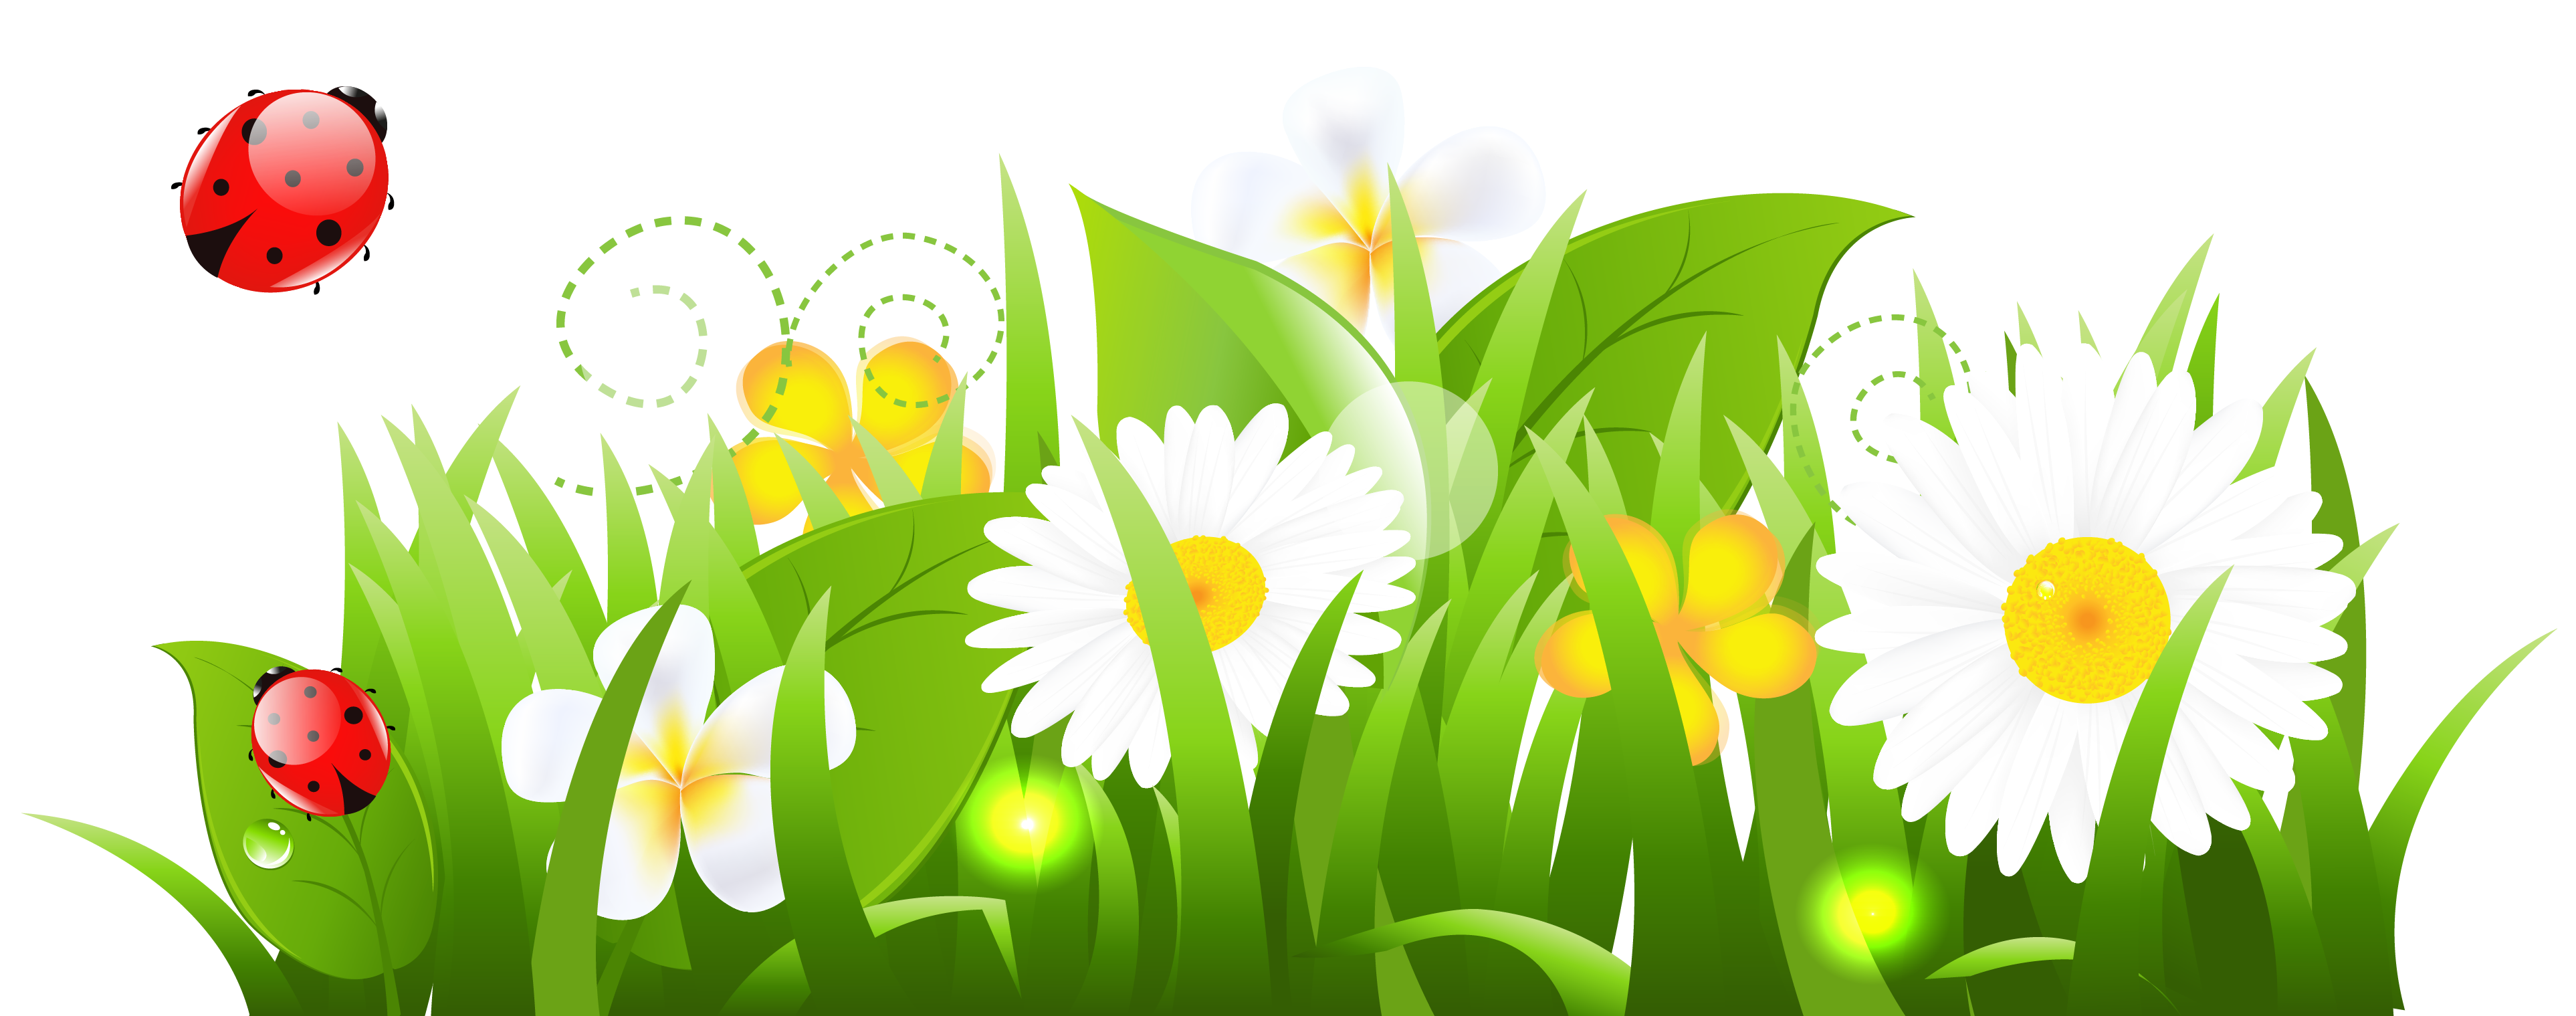 Free Flower Grass Cliparts, Download Free Clip Art, Free.